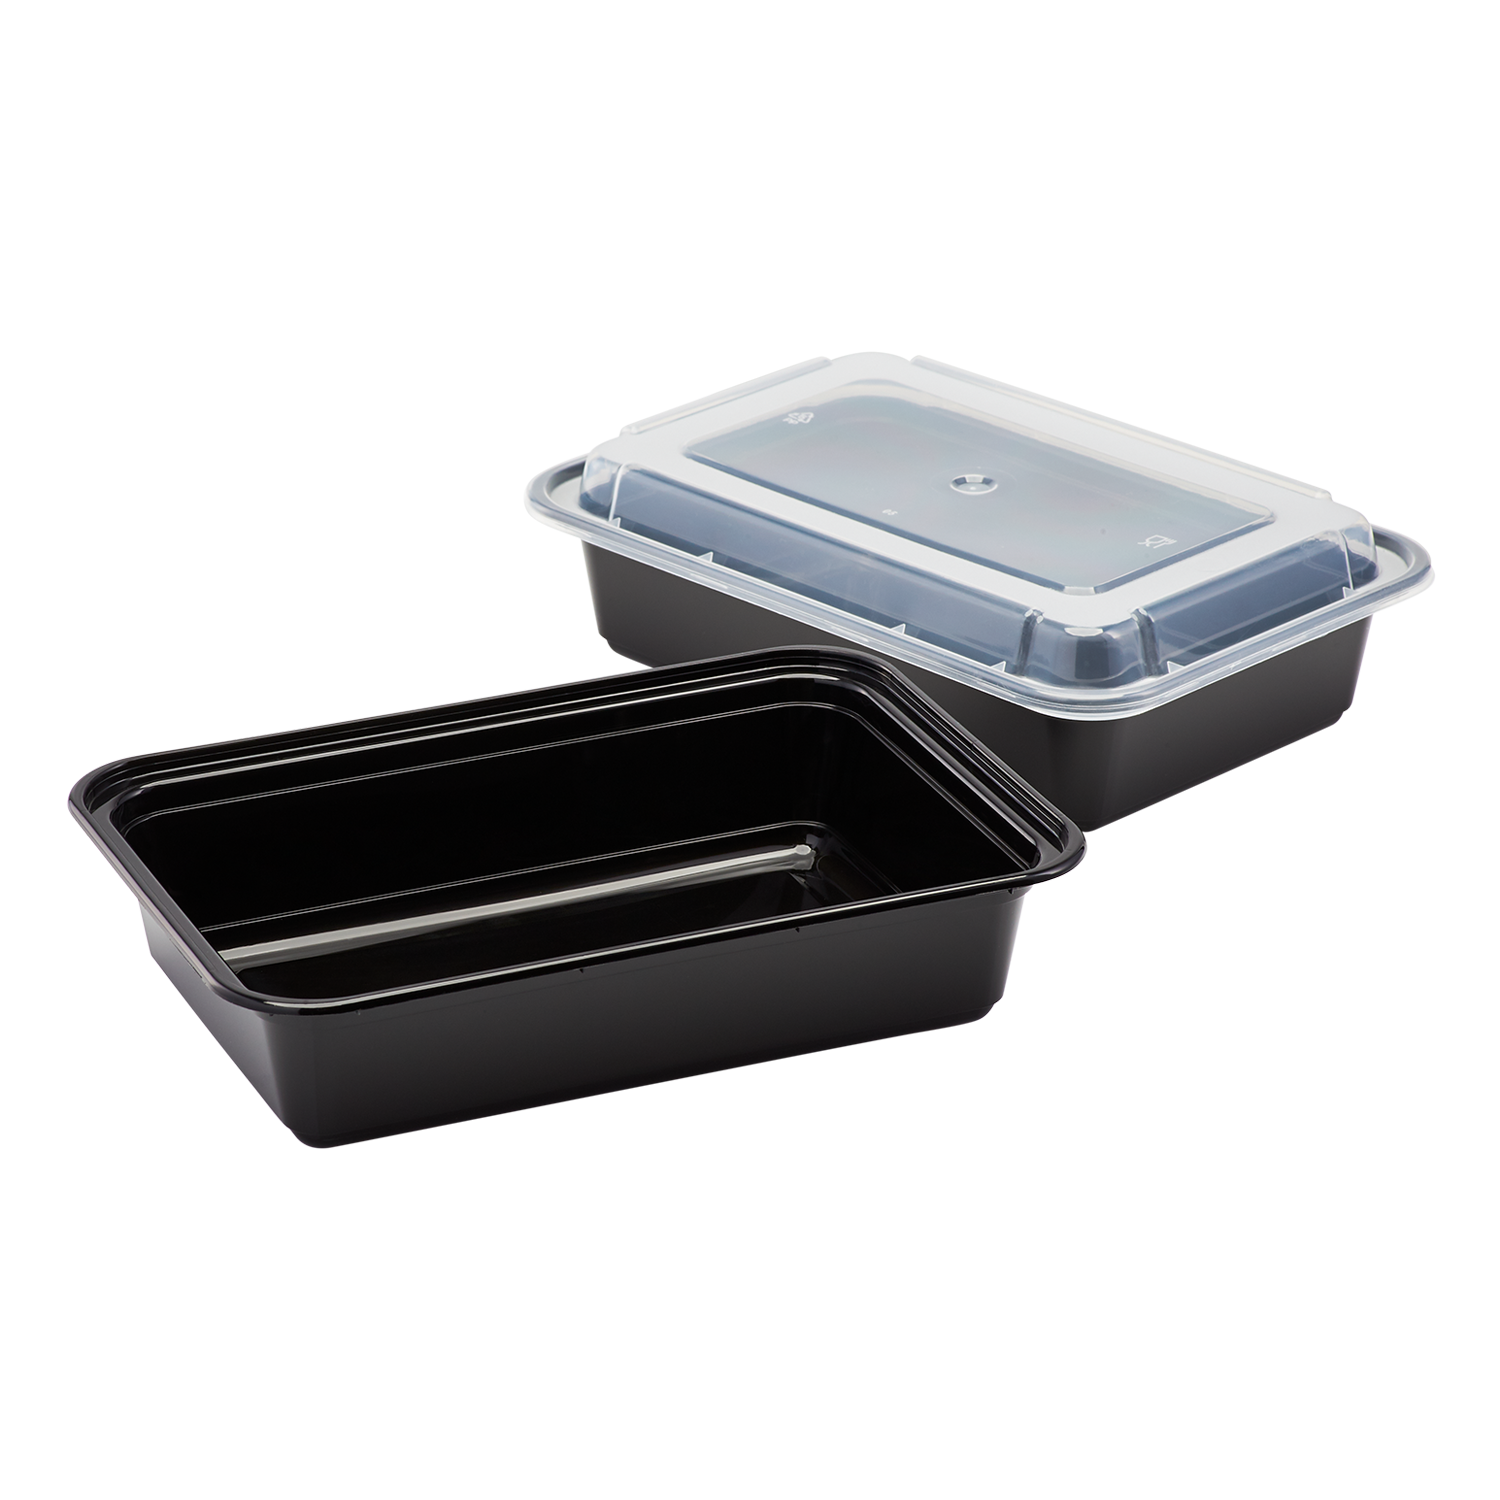 Glad Take-Aways meal prep containers, 50 pieces. 38 oz rectangles